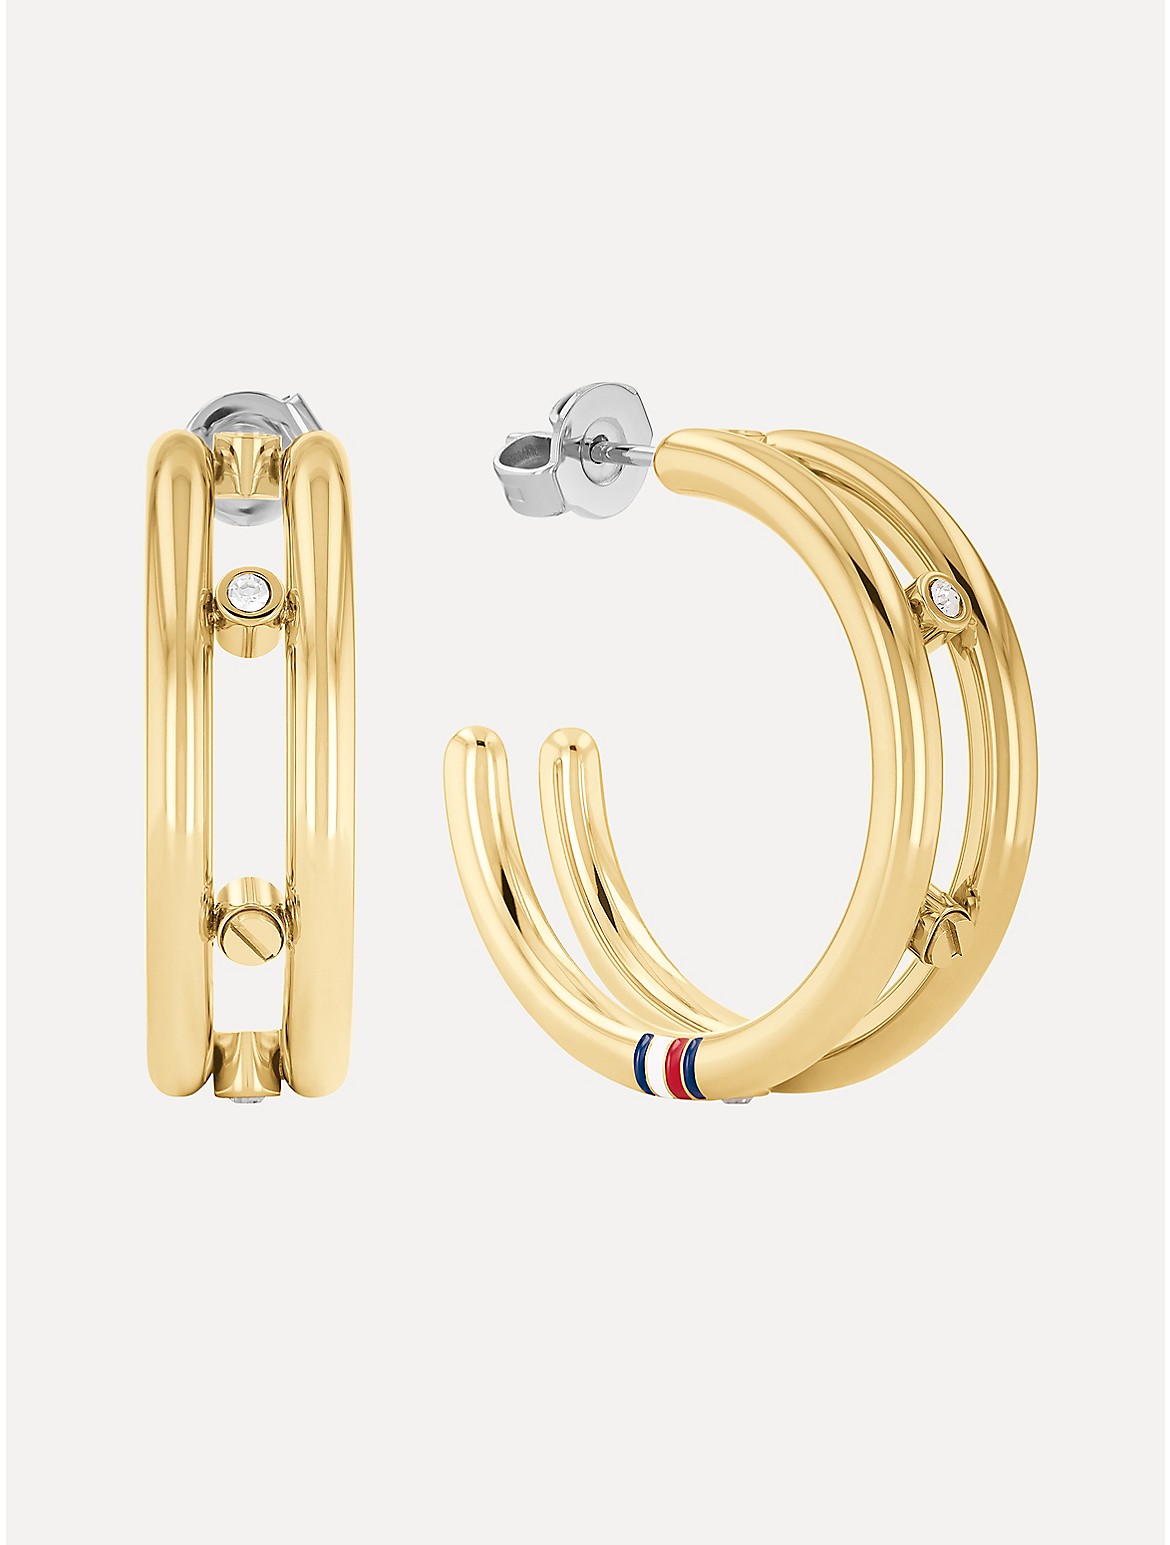 Tommy Hilfiger Women's Gold-Plated Crystal Accent Hoop Earring - Metallic